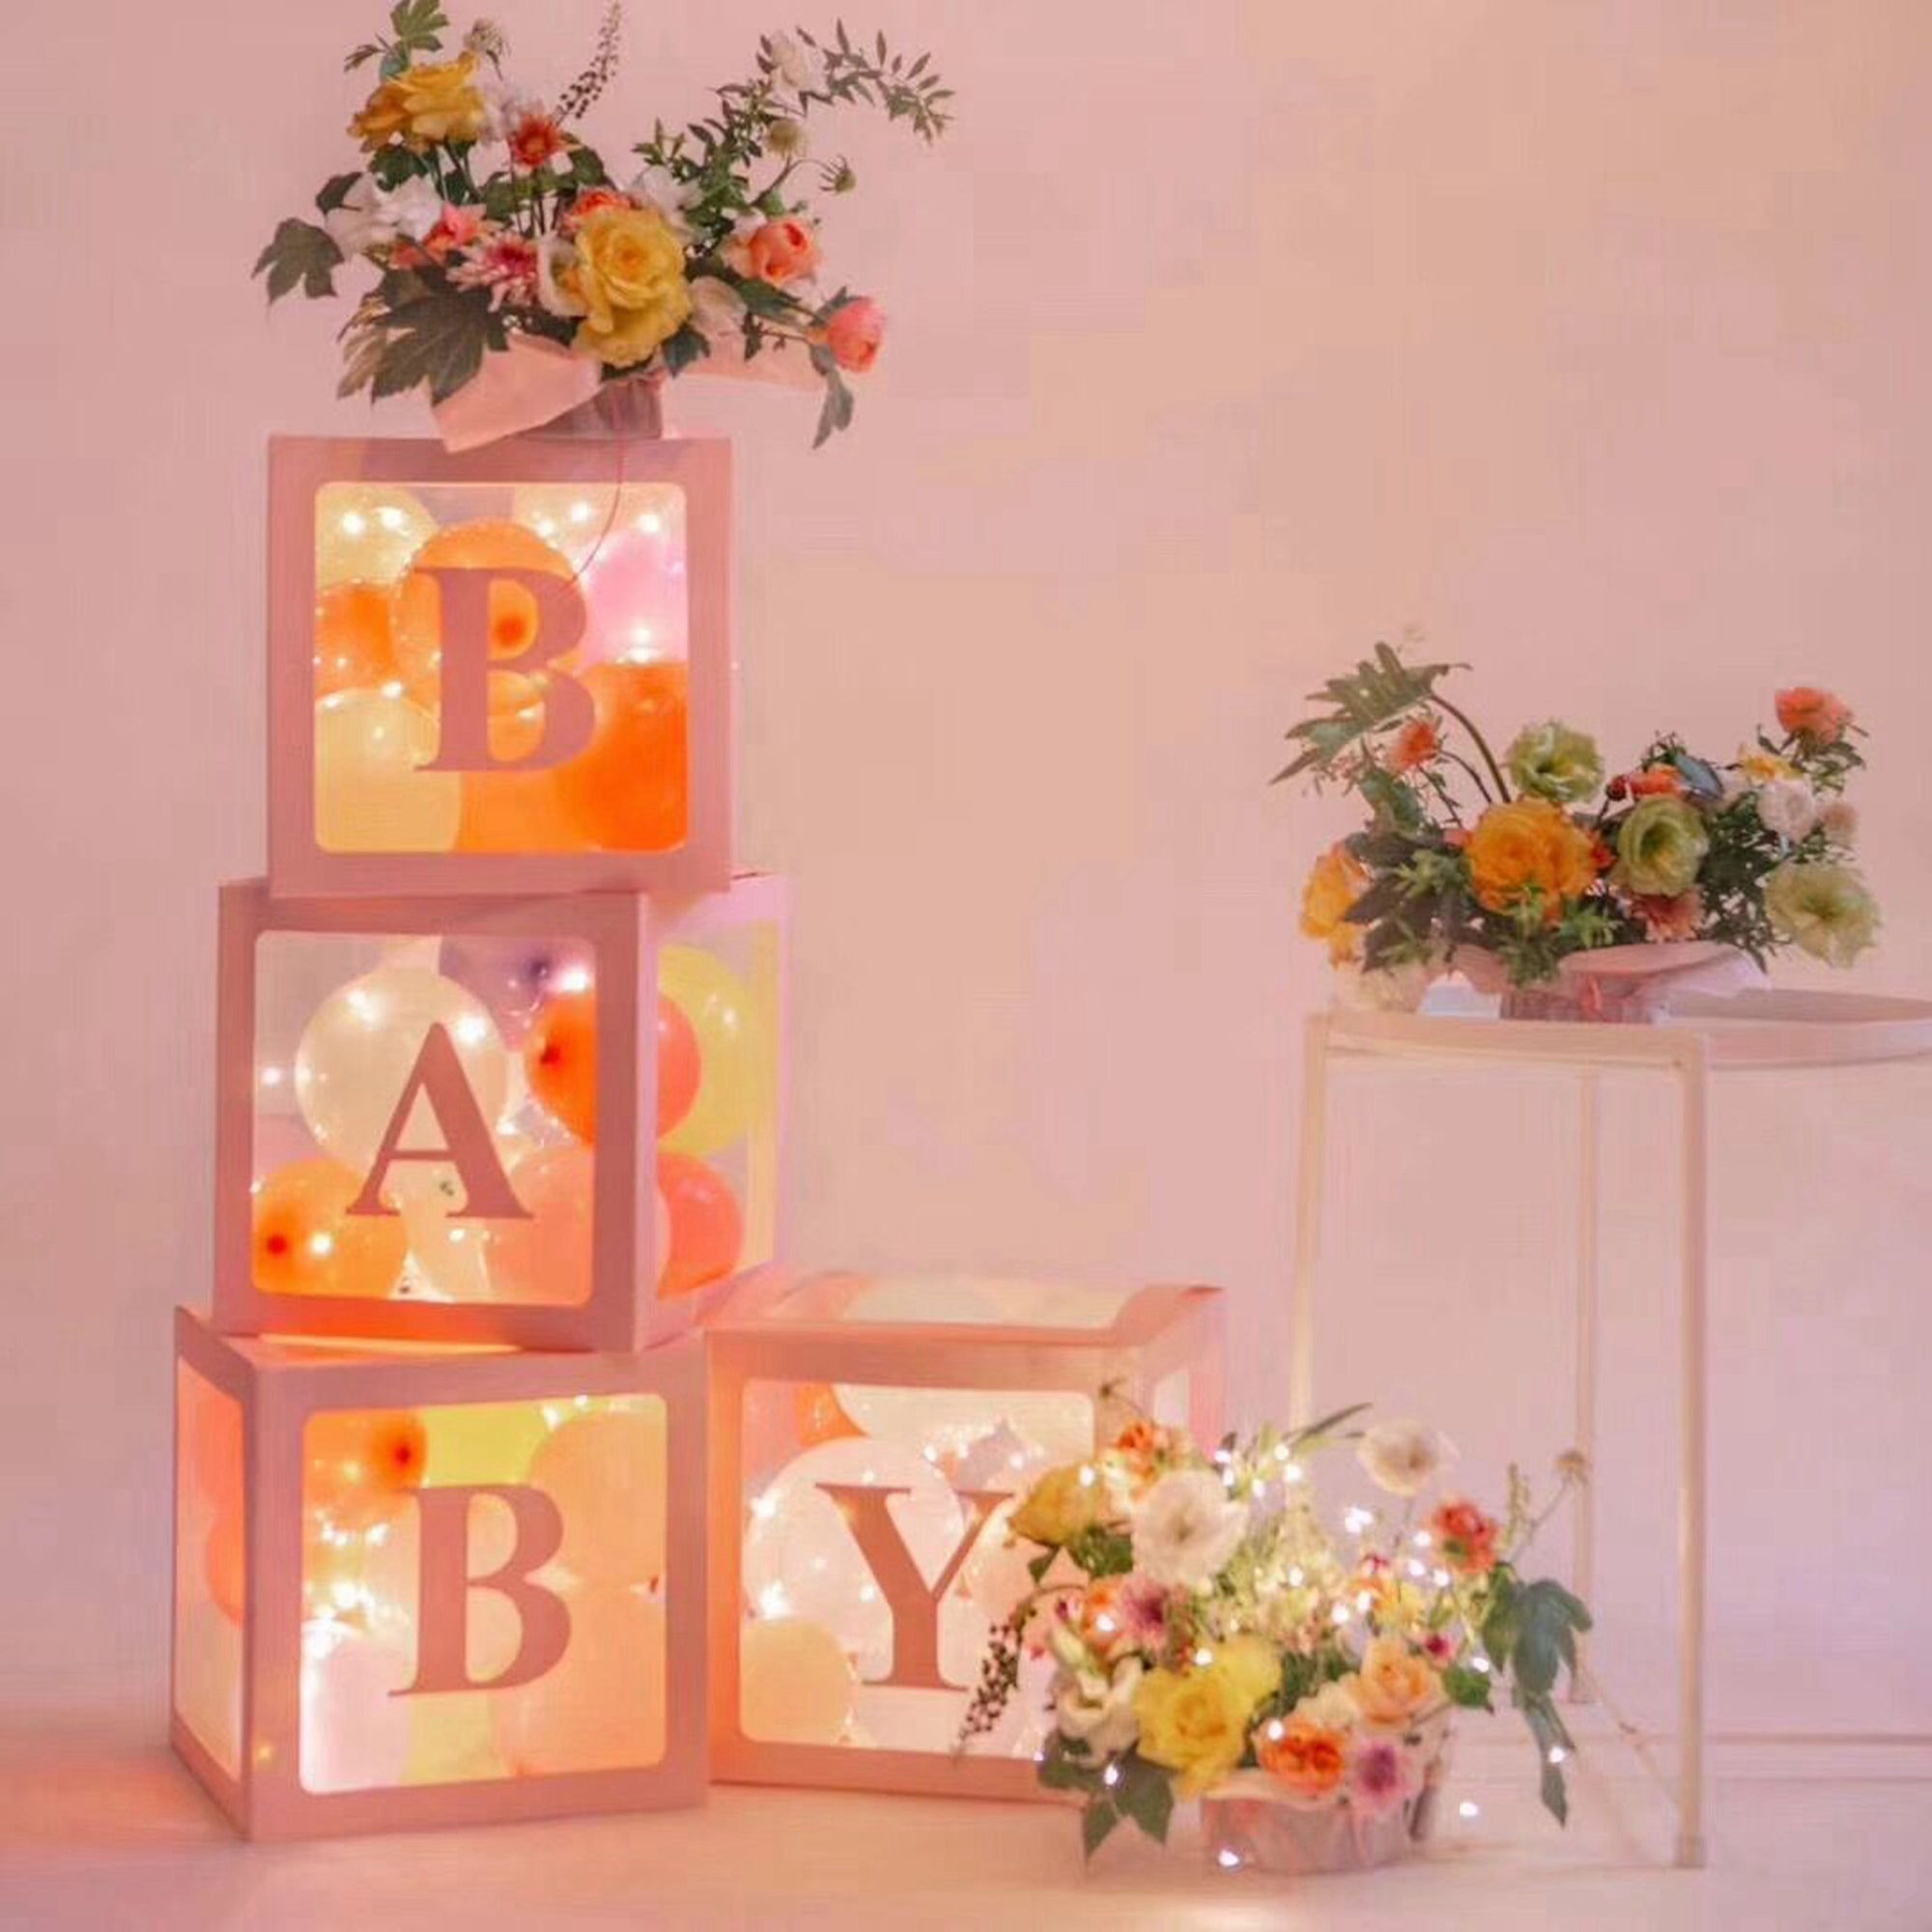 Baby Shower Box Set of 4 Pink Baby Block Boxes with Baby Letters Party Decoration - Transparent Ballon Boxes Backdrop - Baby Shower & Birthday Party